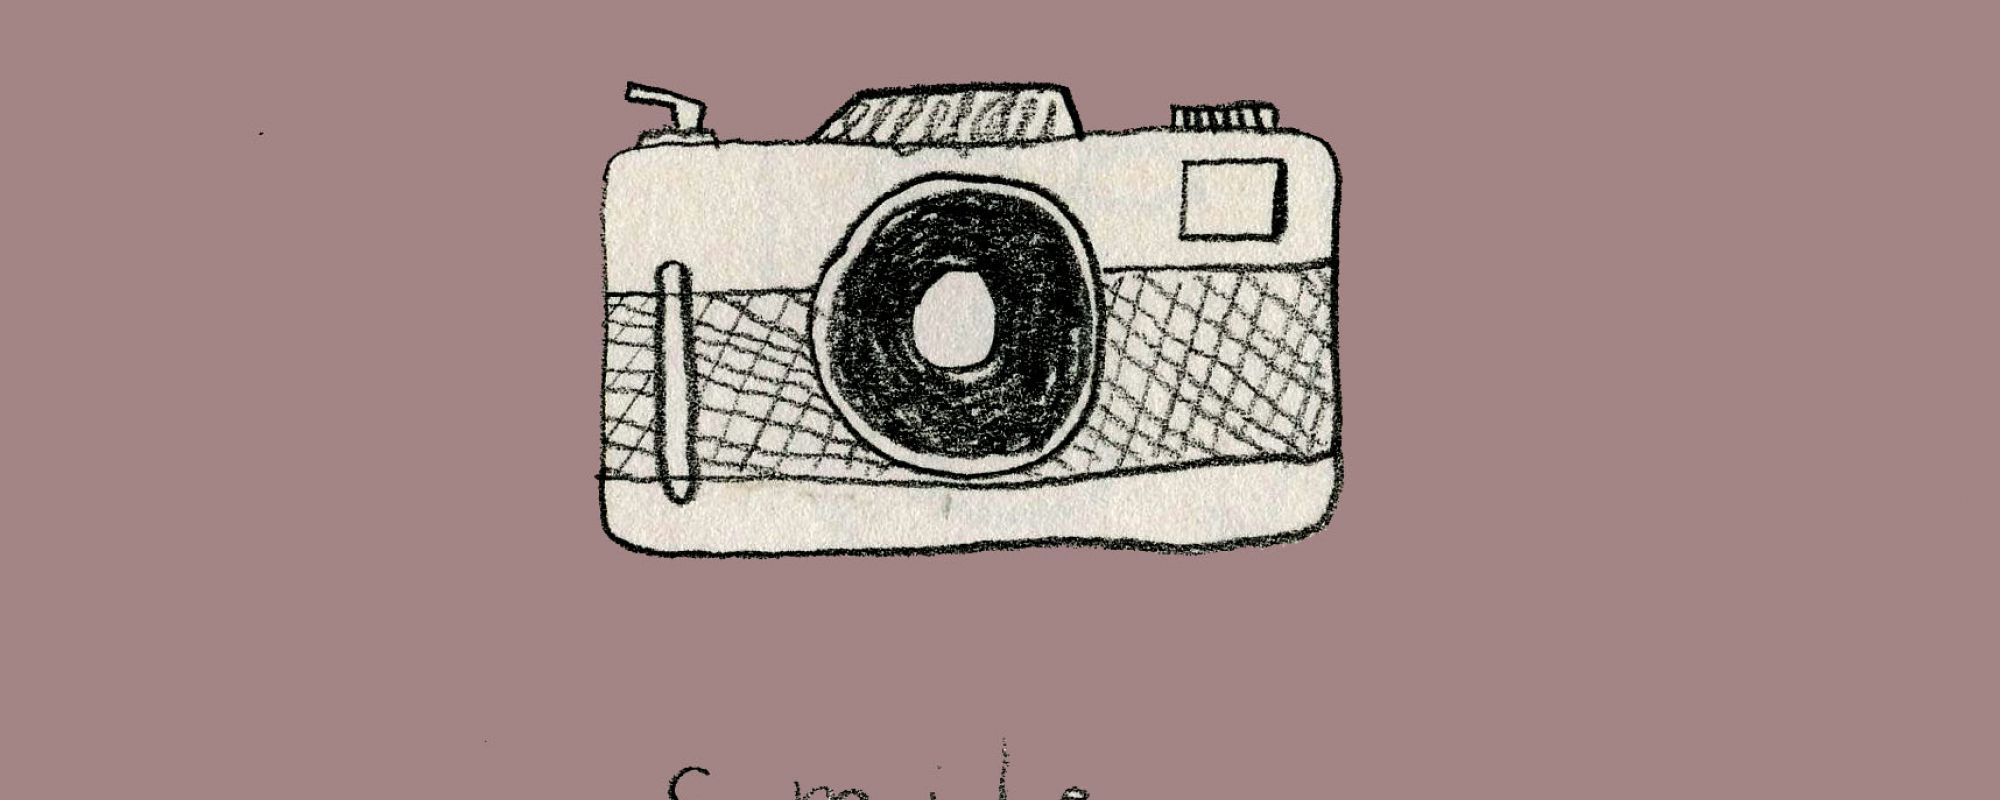 Old camera with a light purple background